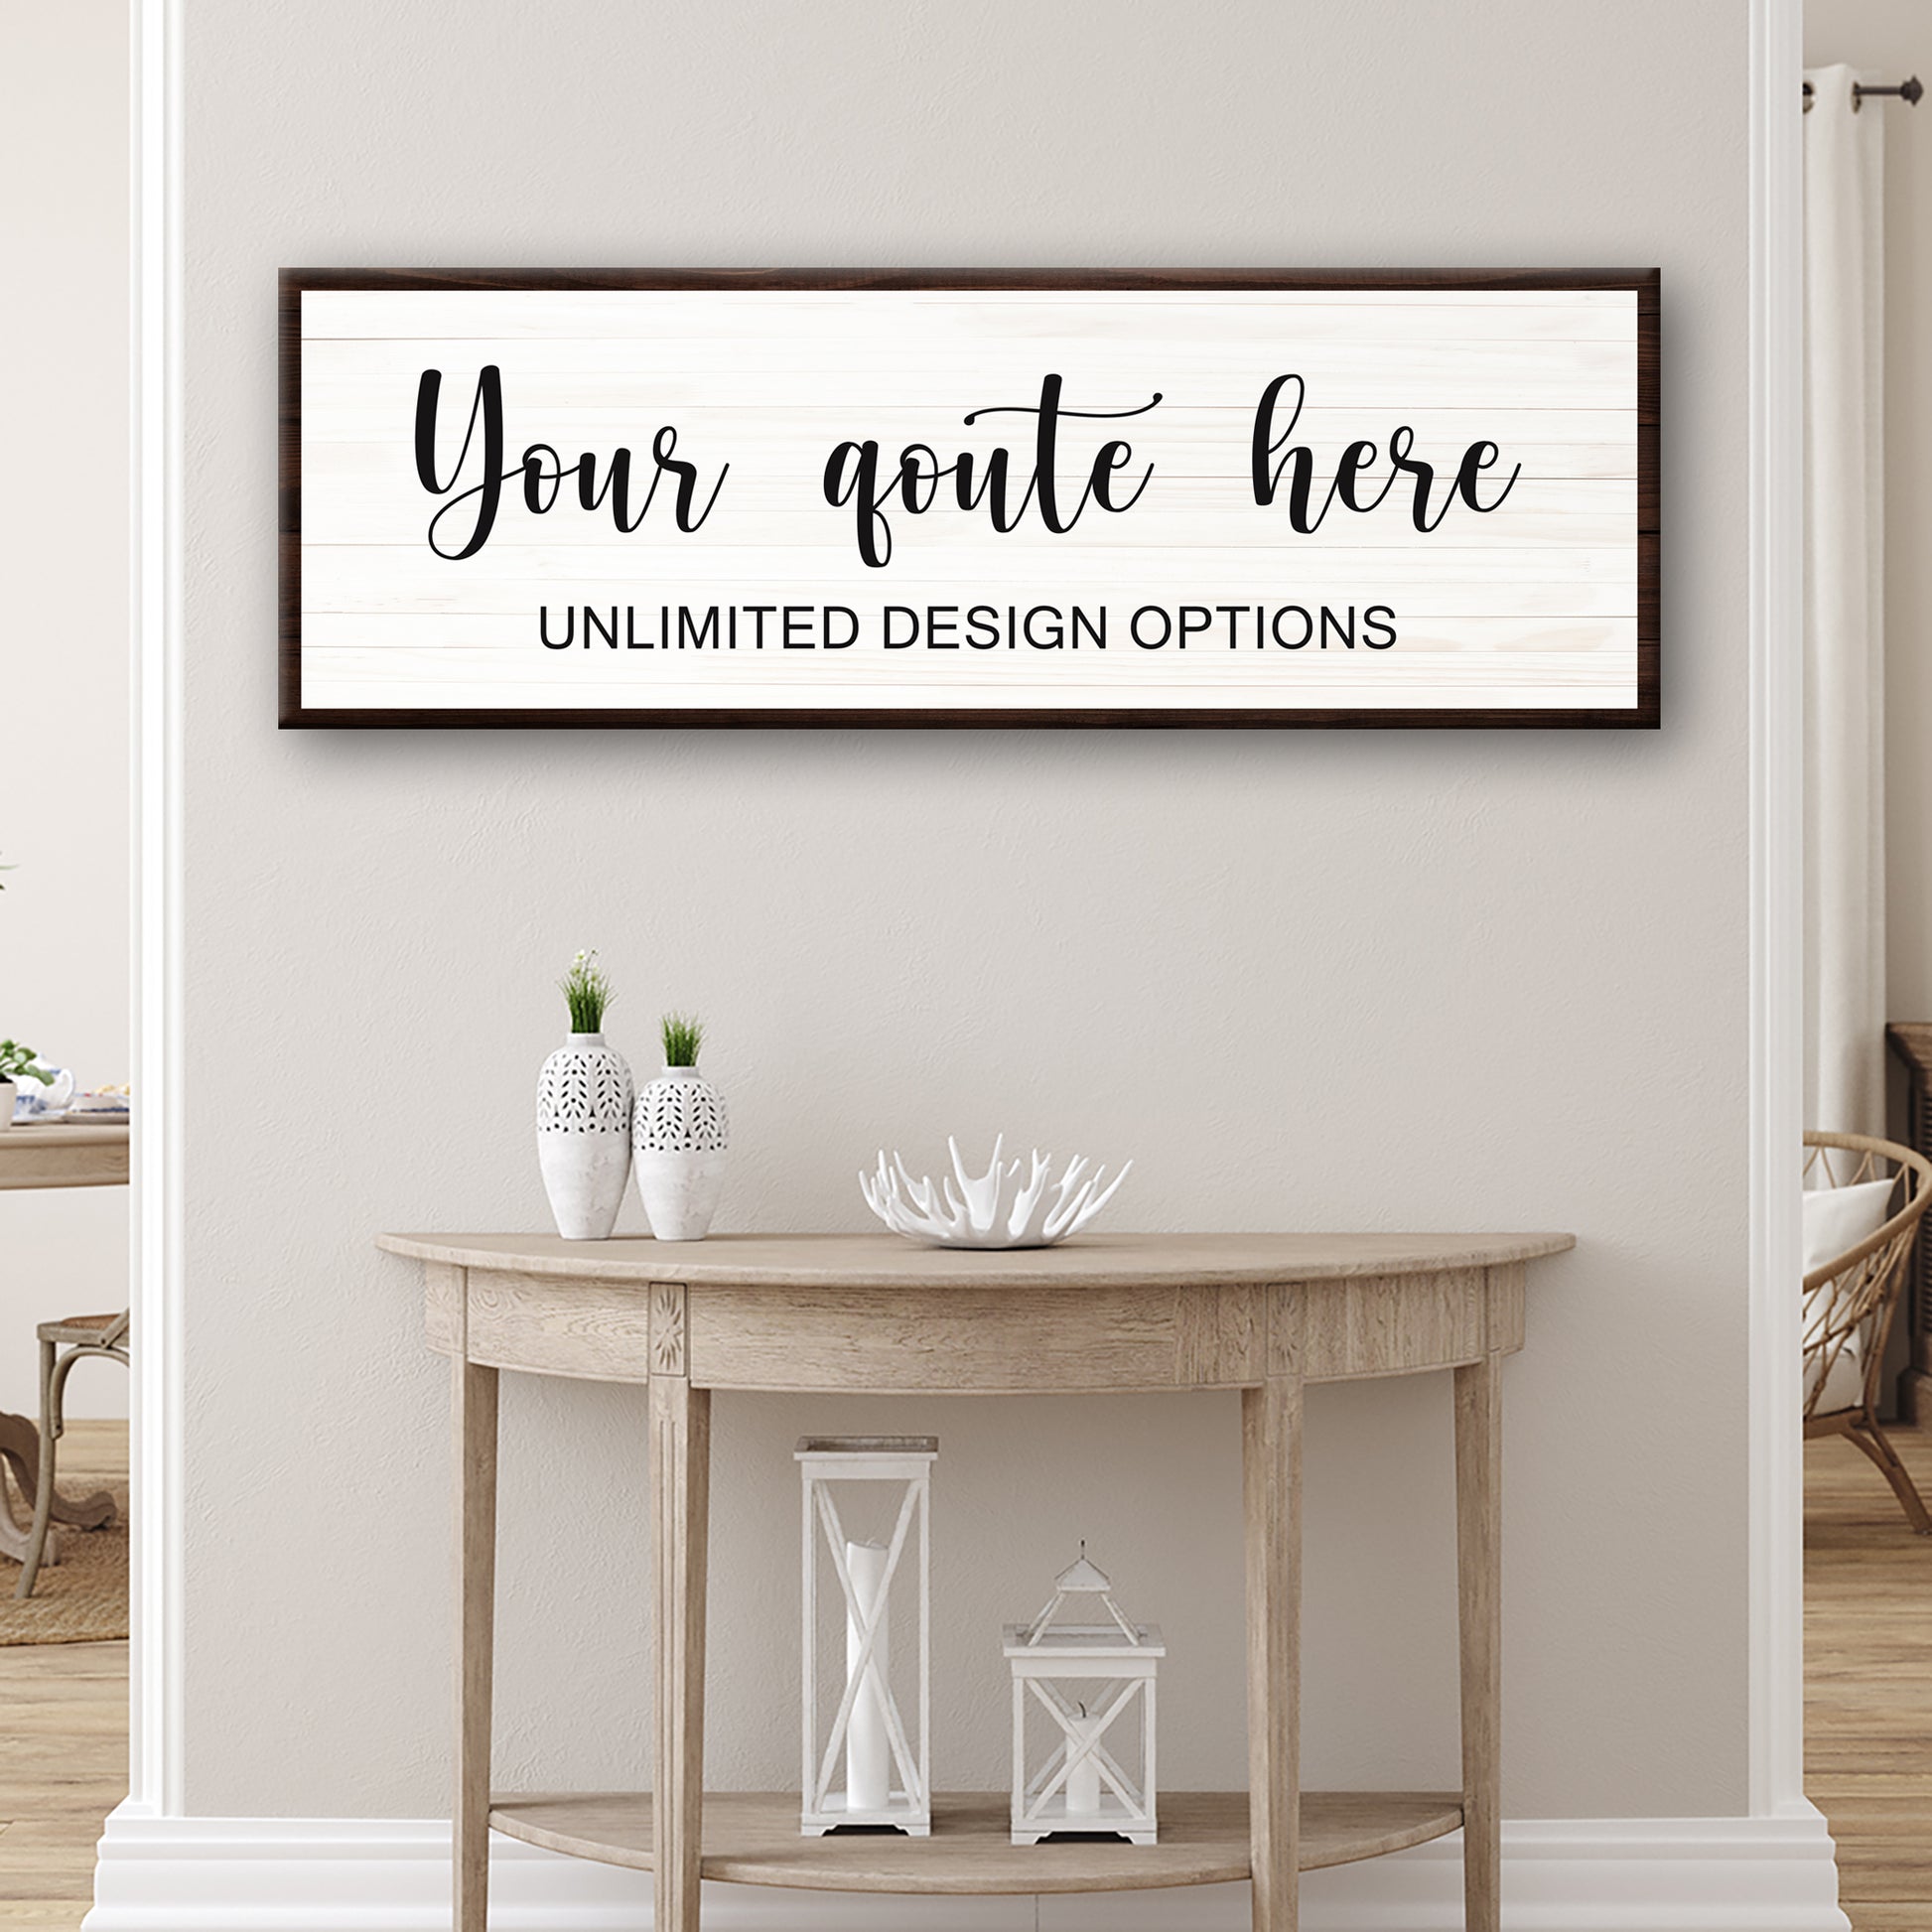 Quote Sign - Image by Tailored Canvases